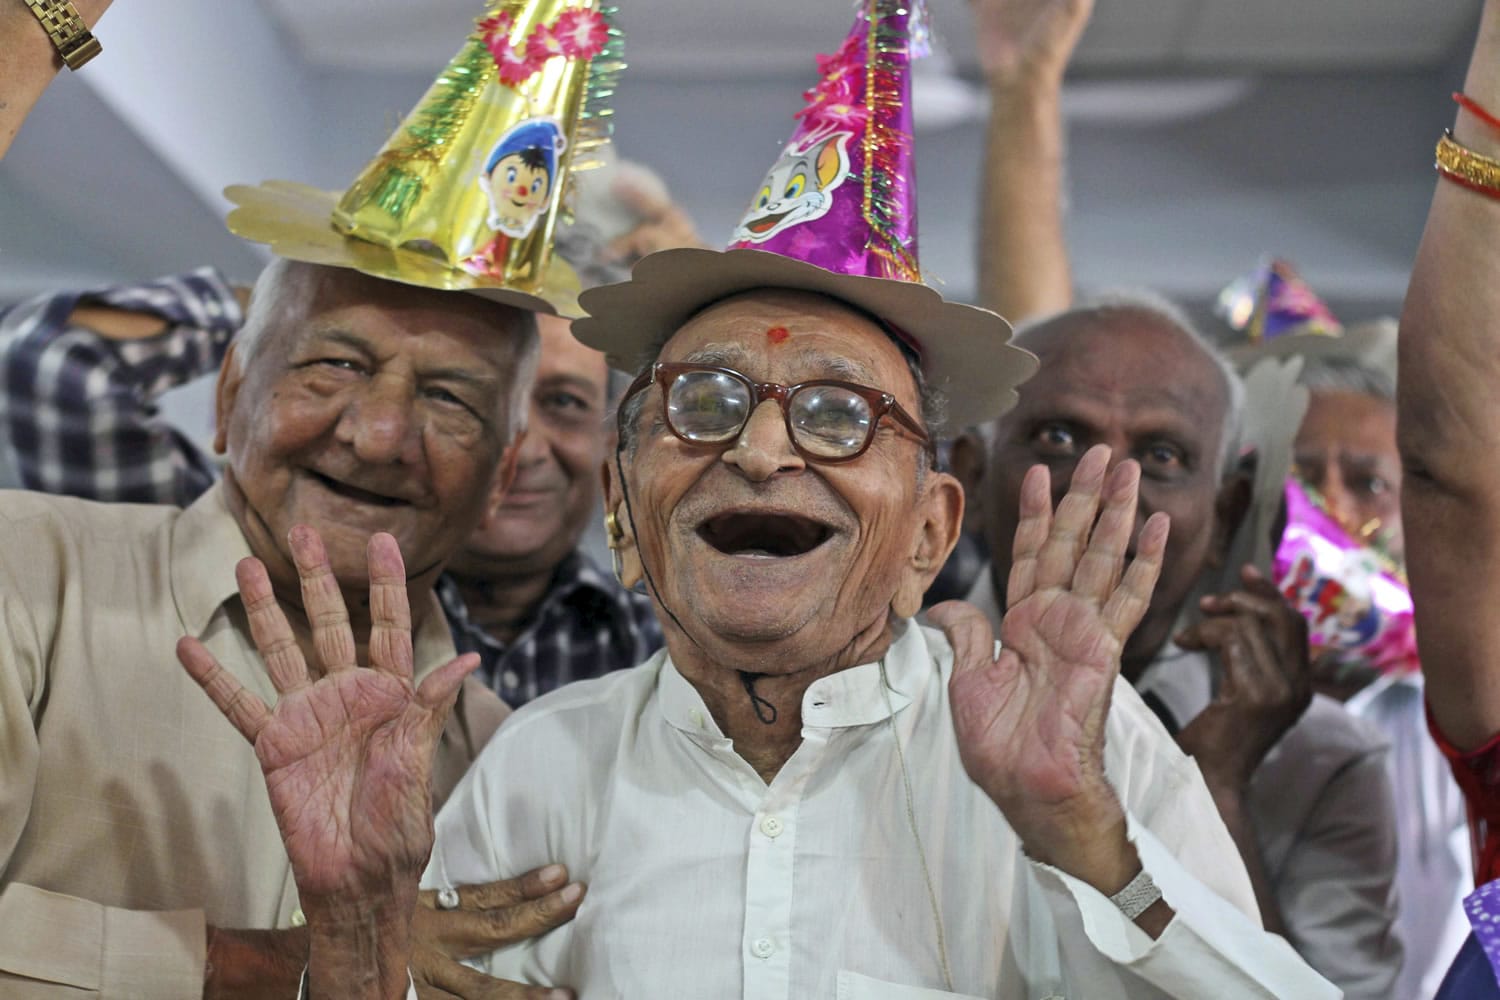 Indians participate in celebrations to mark International Day of Older Persons on Tuesday at an old-age home in Ahmadabad, India.